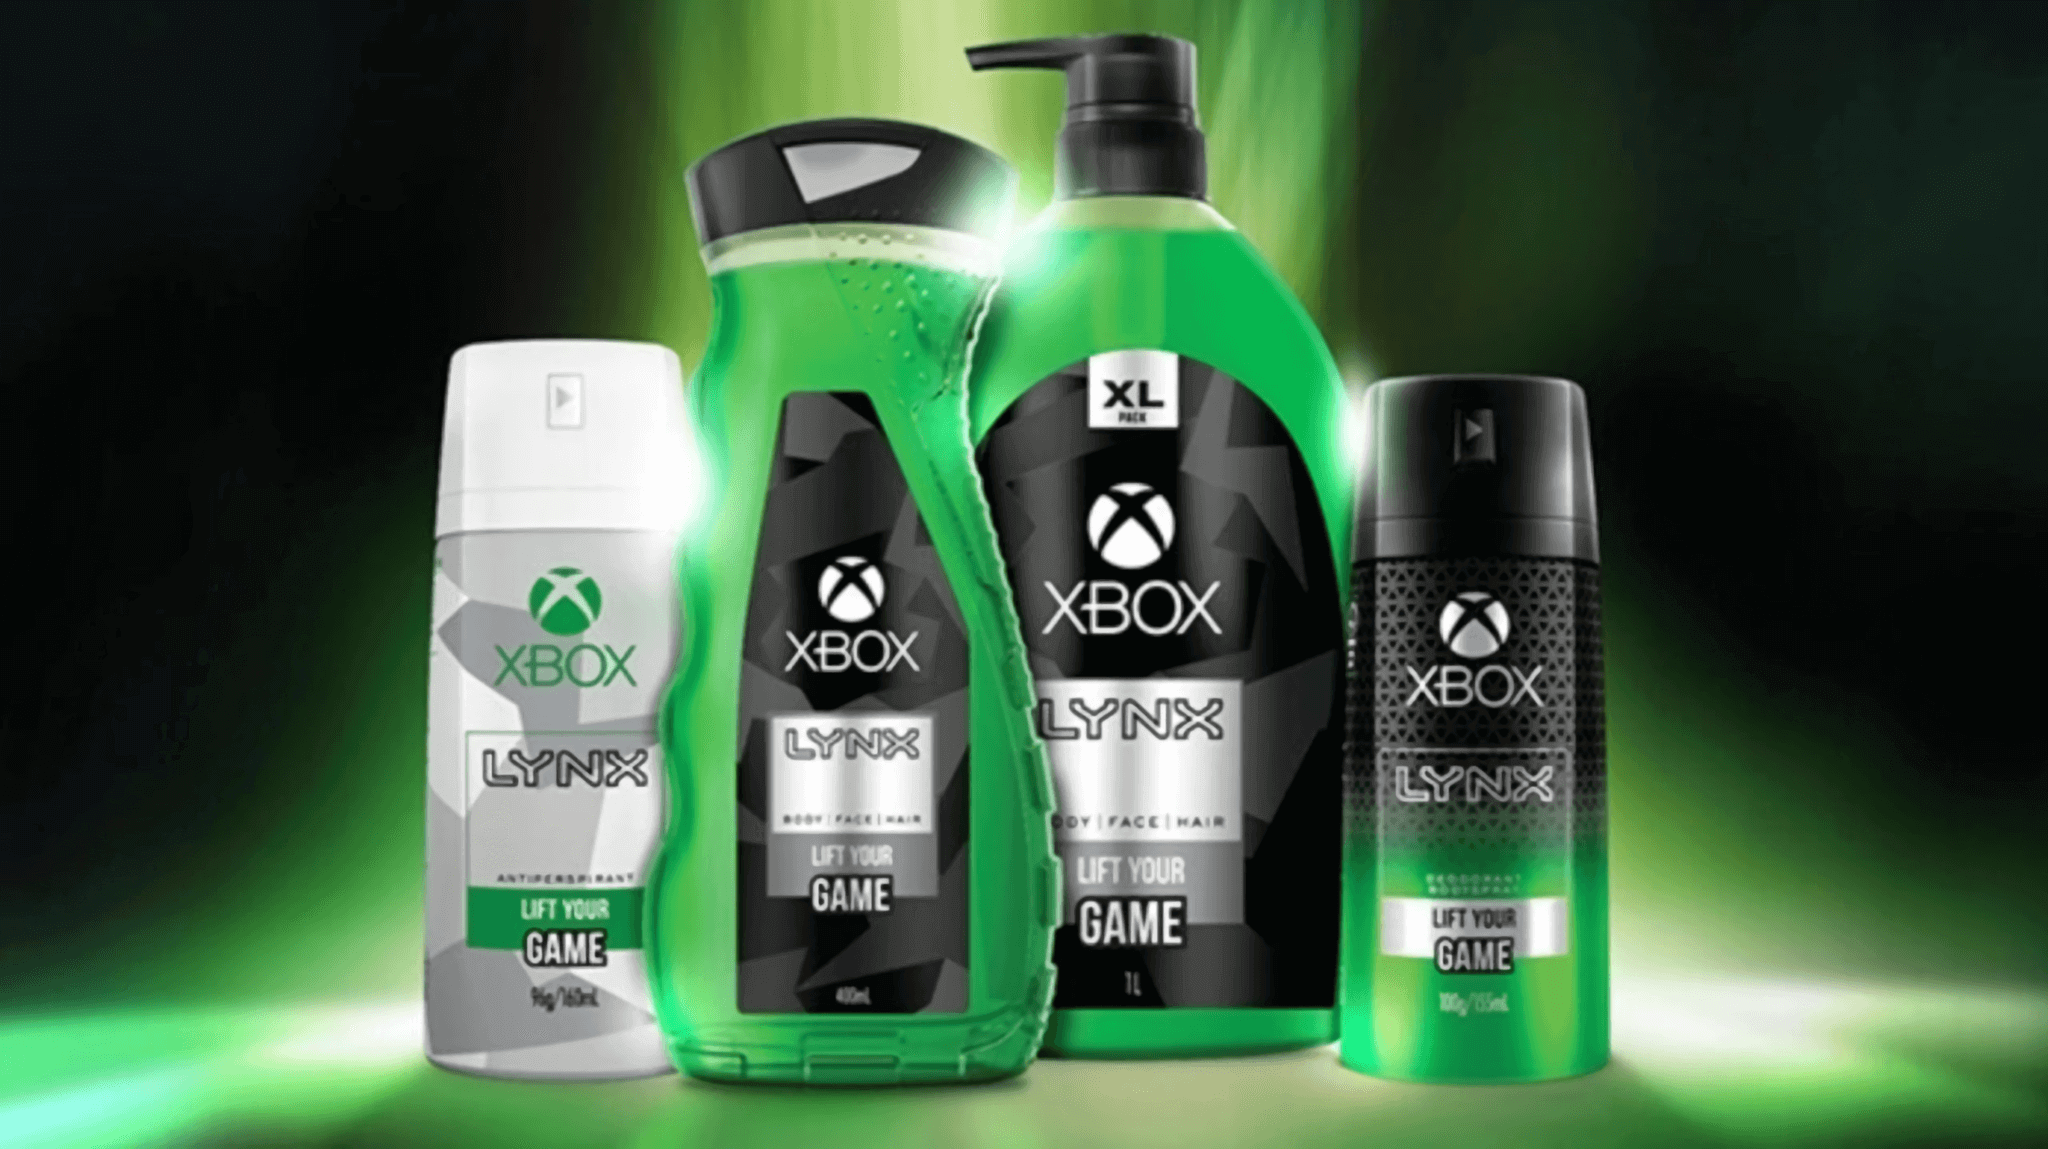 Xbox is getting its own line of personal hygiene products